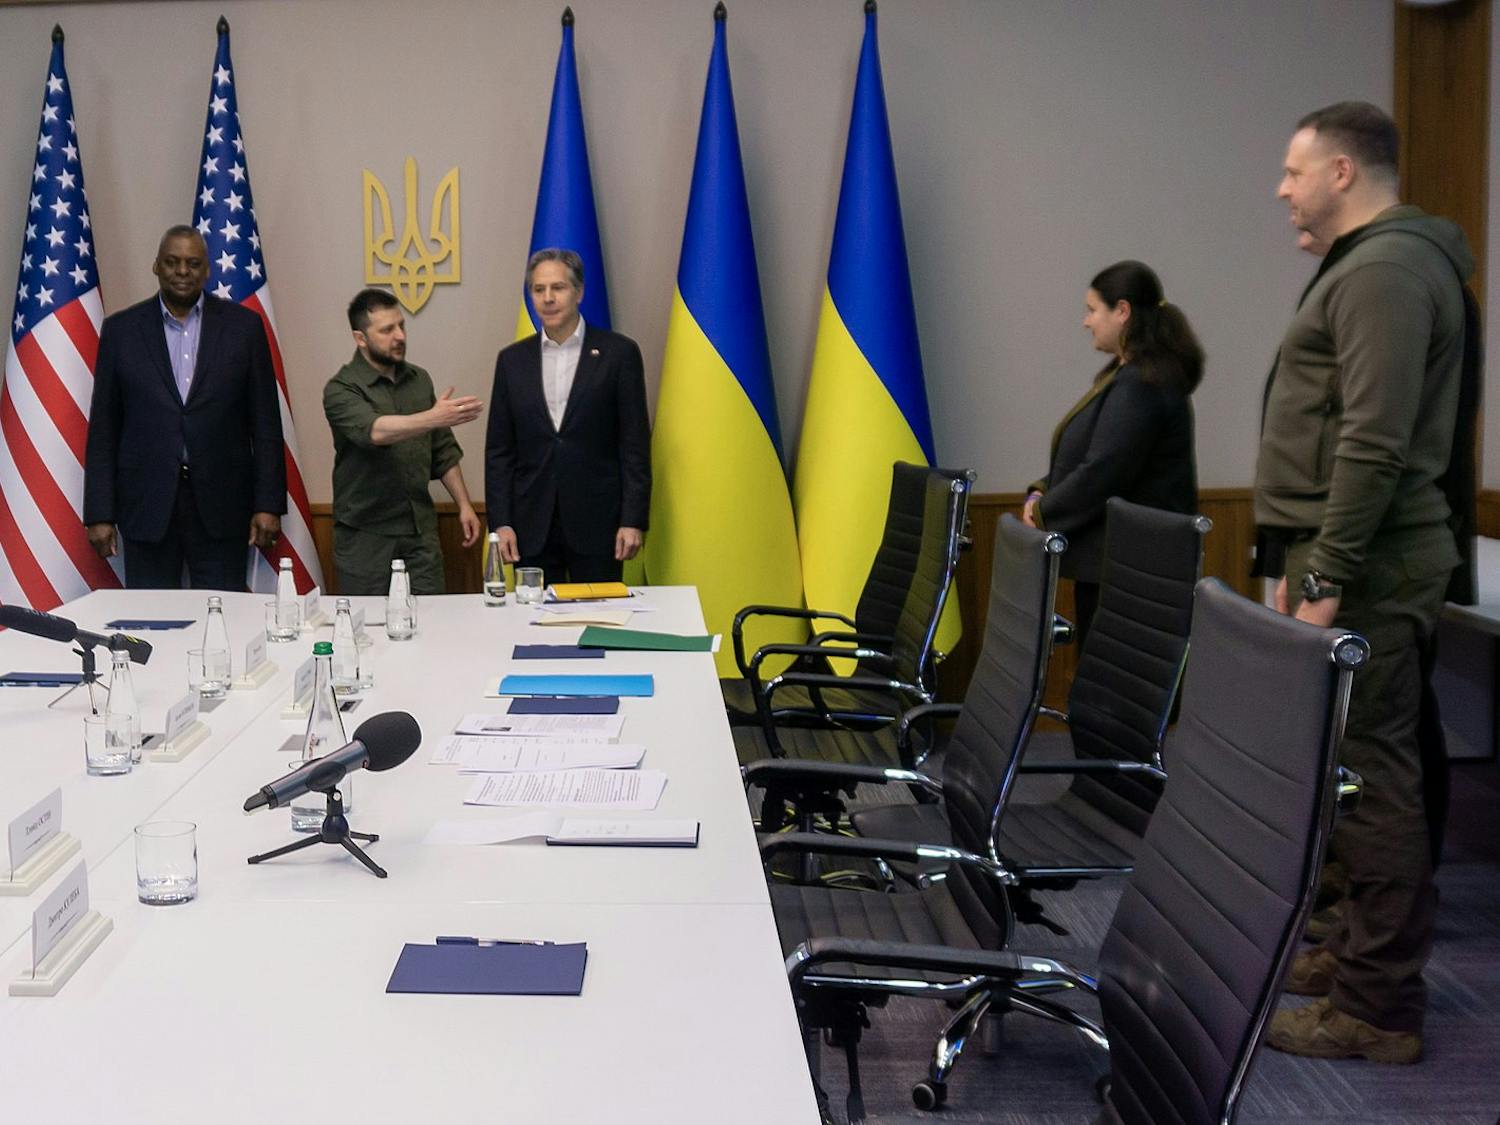 United States Secretary of State, Antony Blinken, surprised the international political world with his unannounced visit to Ukraine in the thick of intense war conditions (Photo courtesy of Wikimedia Commons/“Secretary Blinken and Secretary Austin Visit Ukraine (52028686831)” by U.S. Department of State. January 1, 2014).  